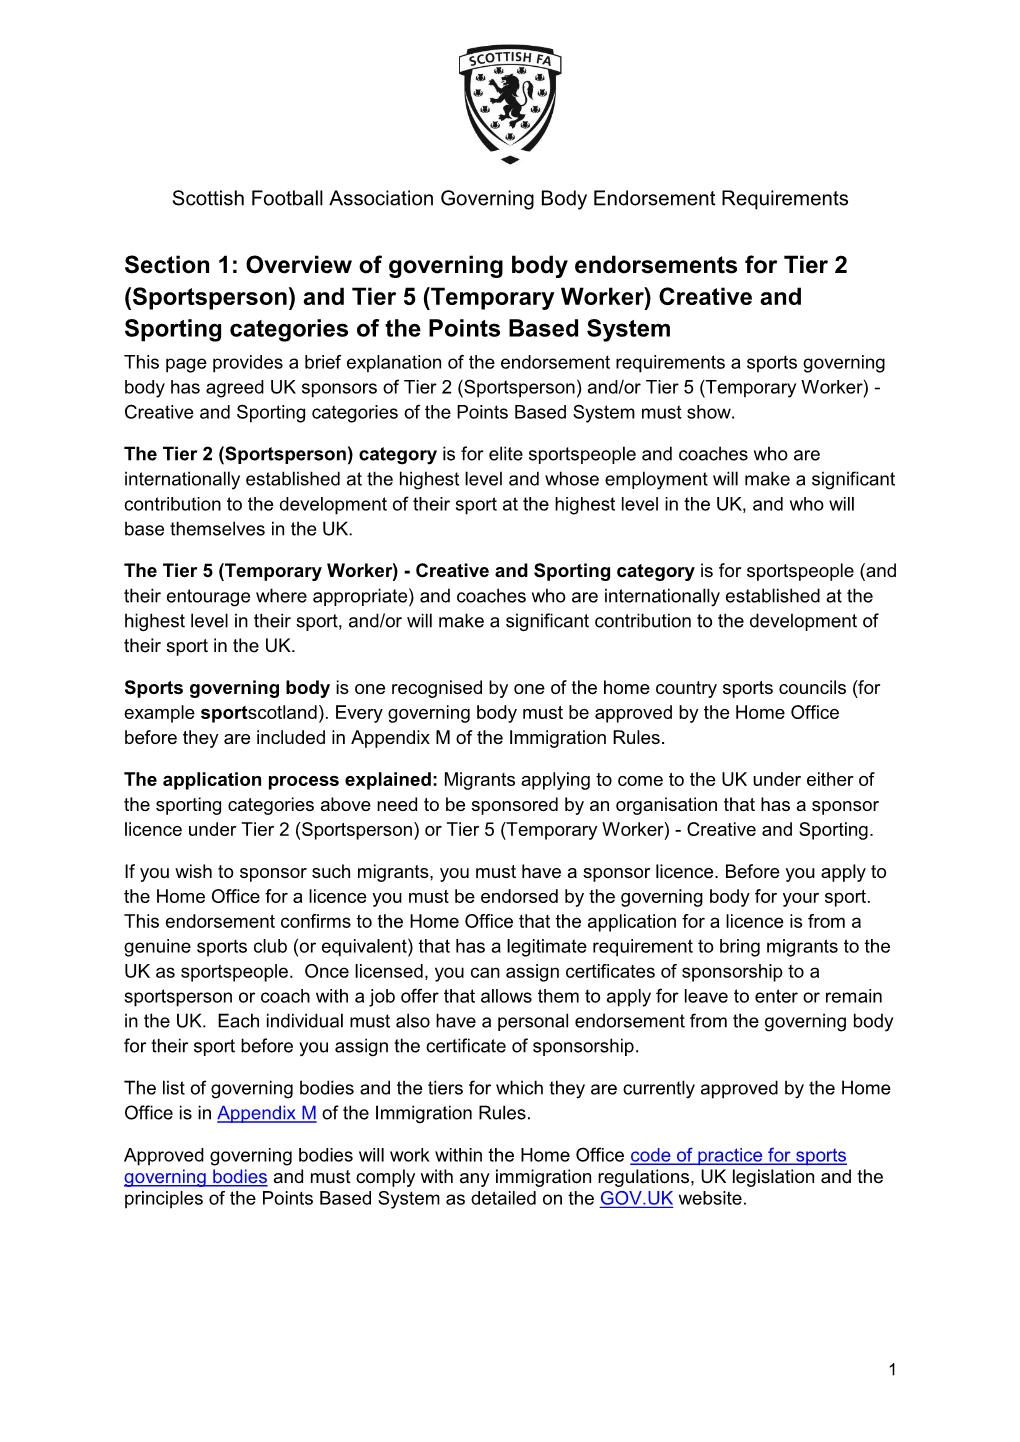 Governing Body Endorsements for Tier 2 (Sportsperson) And